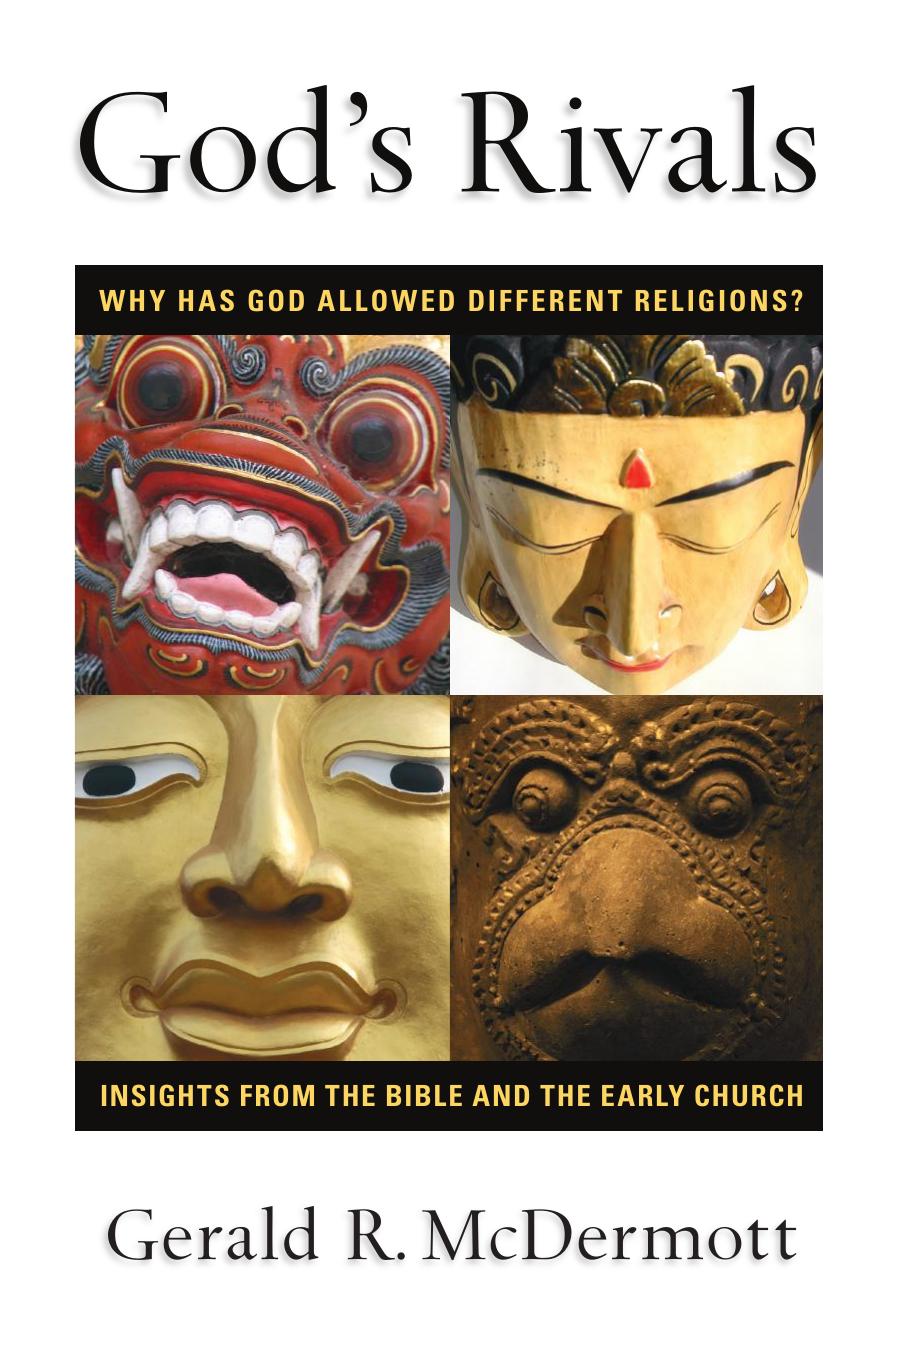 God's Rivals : Why Has God Allowed Different Religions? Insights from the Bible and the Early Church by Gerald R. McDermott